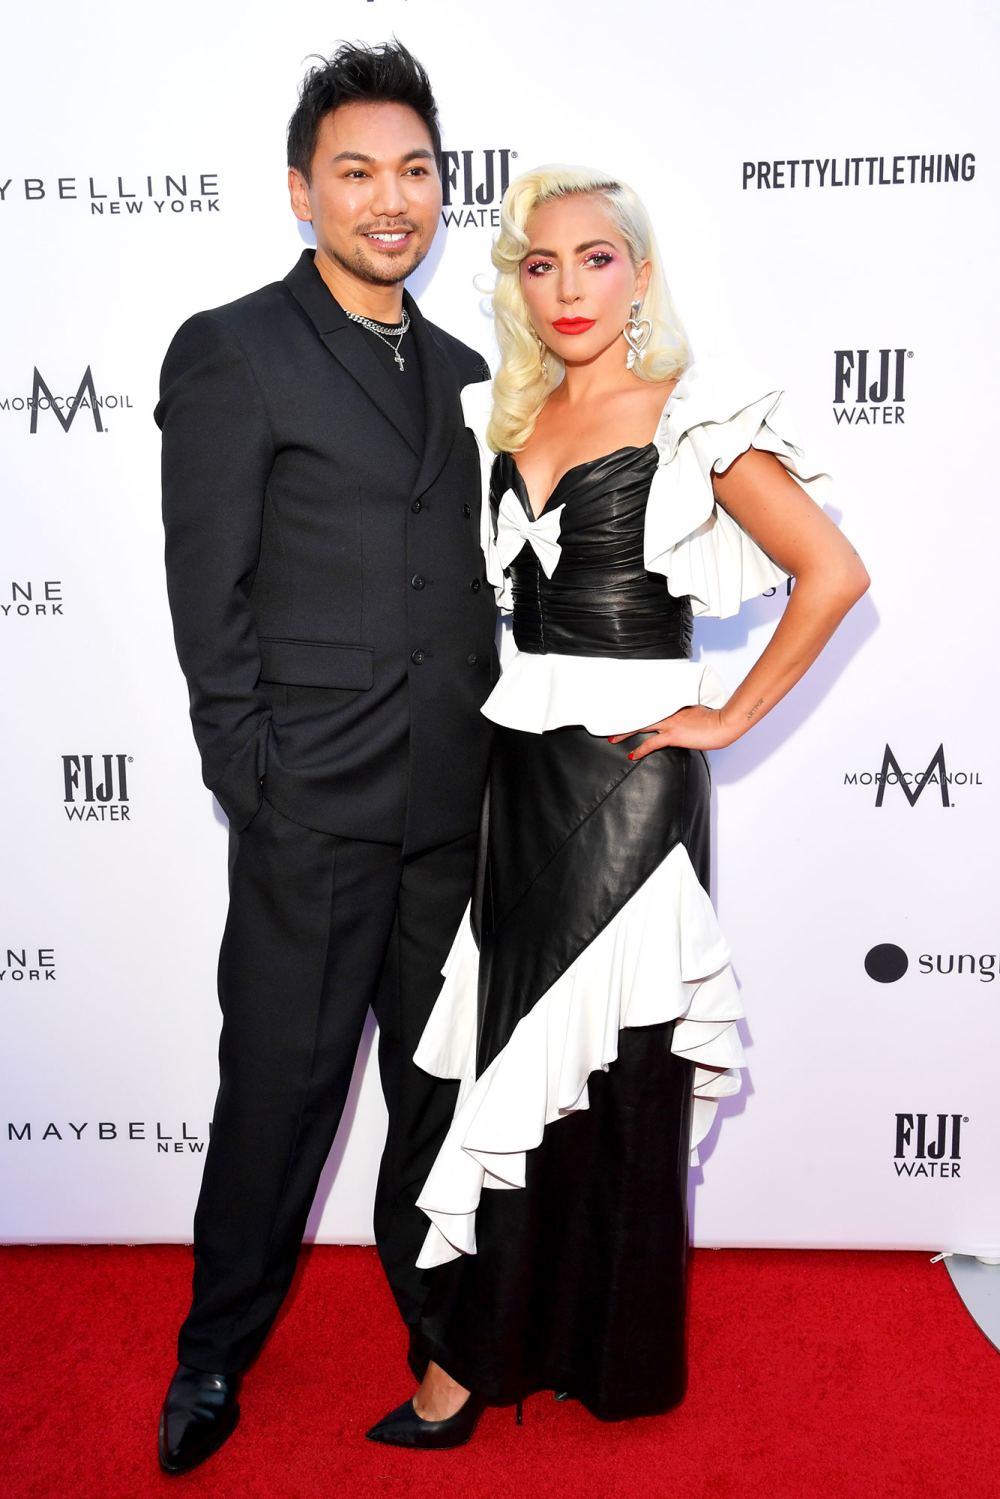 Lady Gaga Reveals Her Hair and Wig Secrets While Honoring Her Hairstylist at the Daily Front Row Fashion Awards